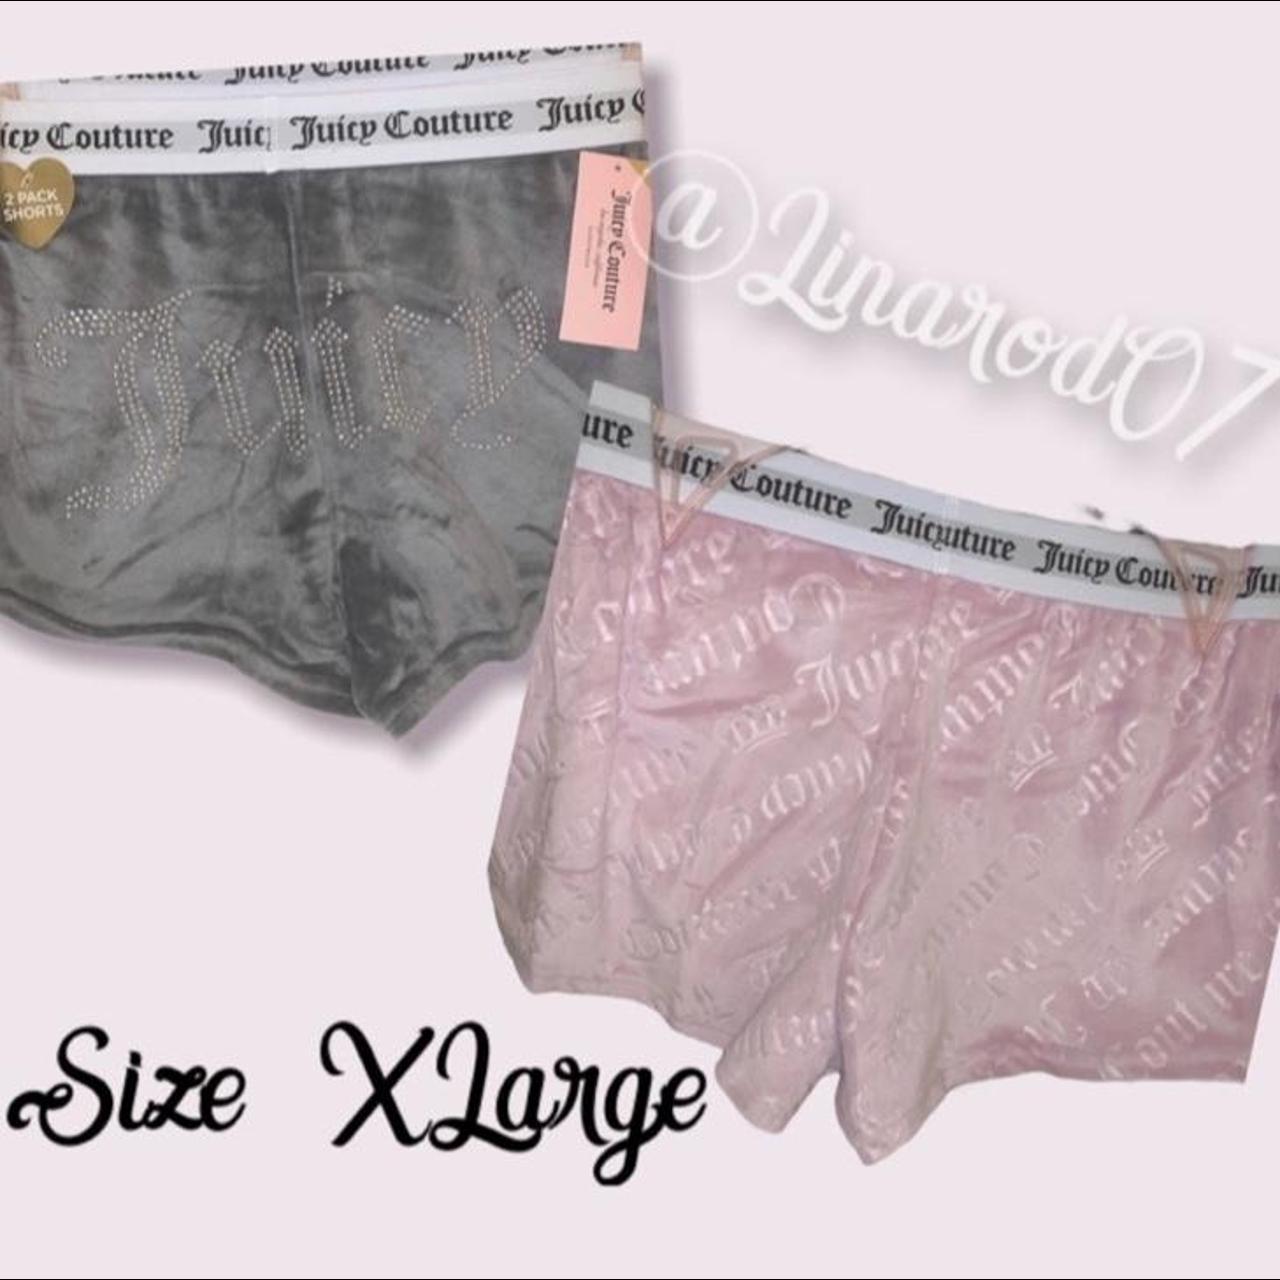 Juicy Couture Gray and Lilac Velour Lounge Shorts Bundle Purple